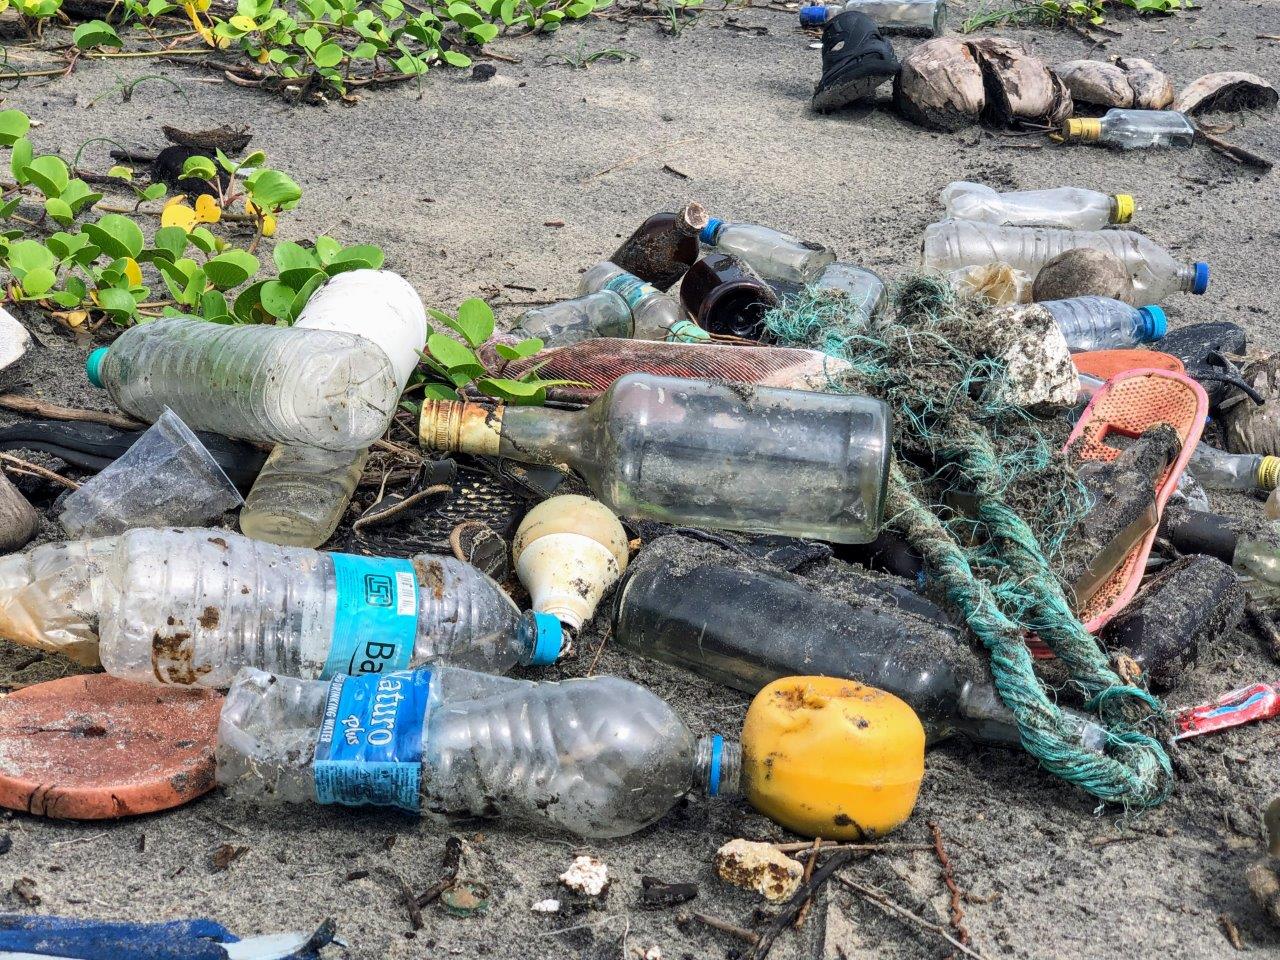 5 Tips to cut down on single-use plastic